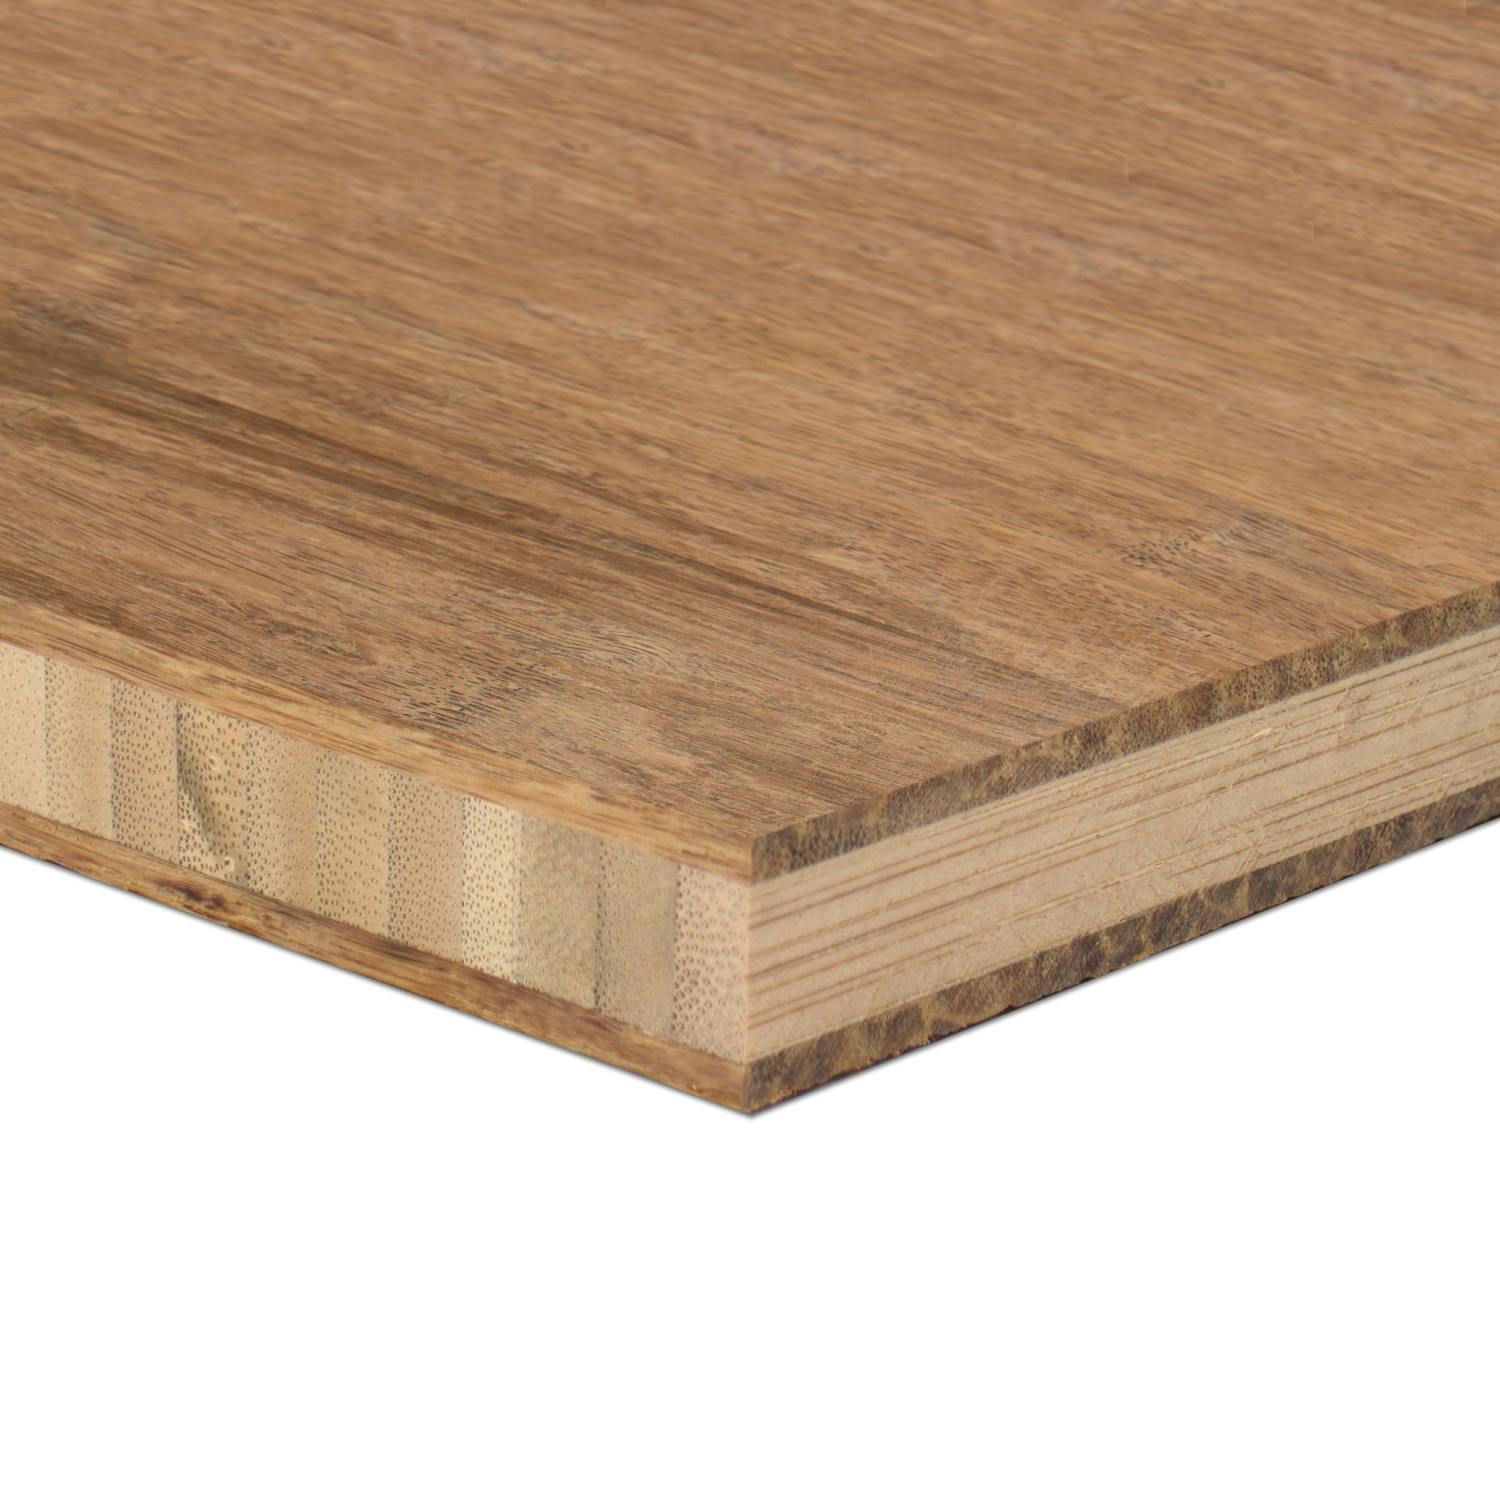 SPECIAL ORDER Bamboo Plywood - 3ply 3/4 in. Fossilized® Carbonized